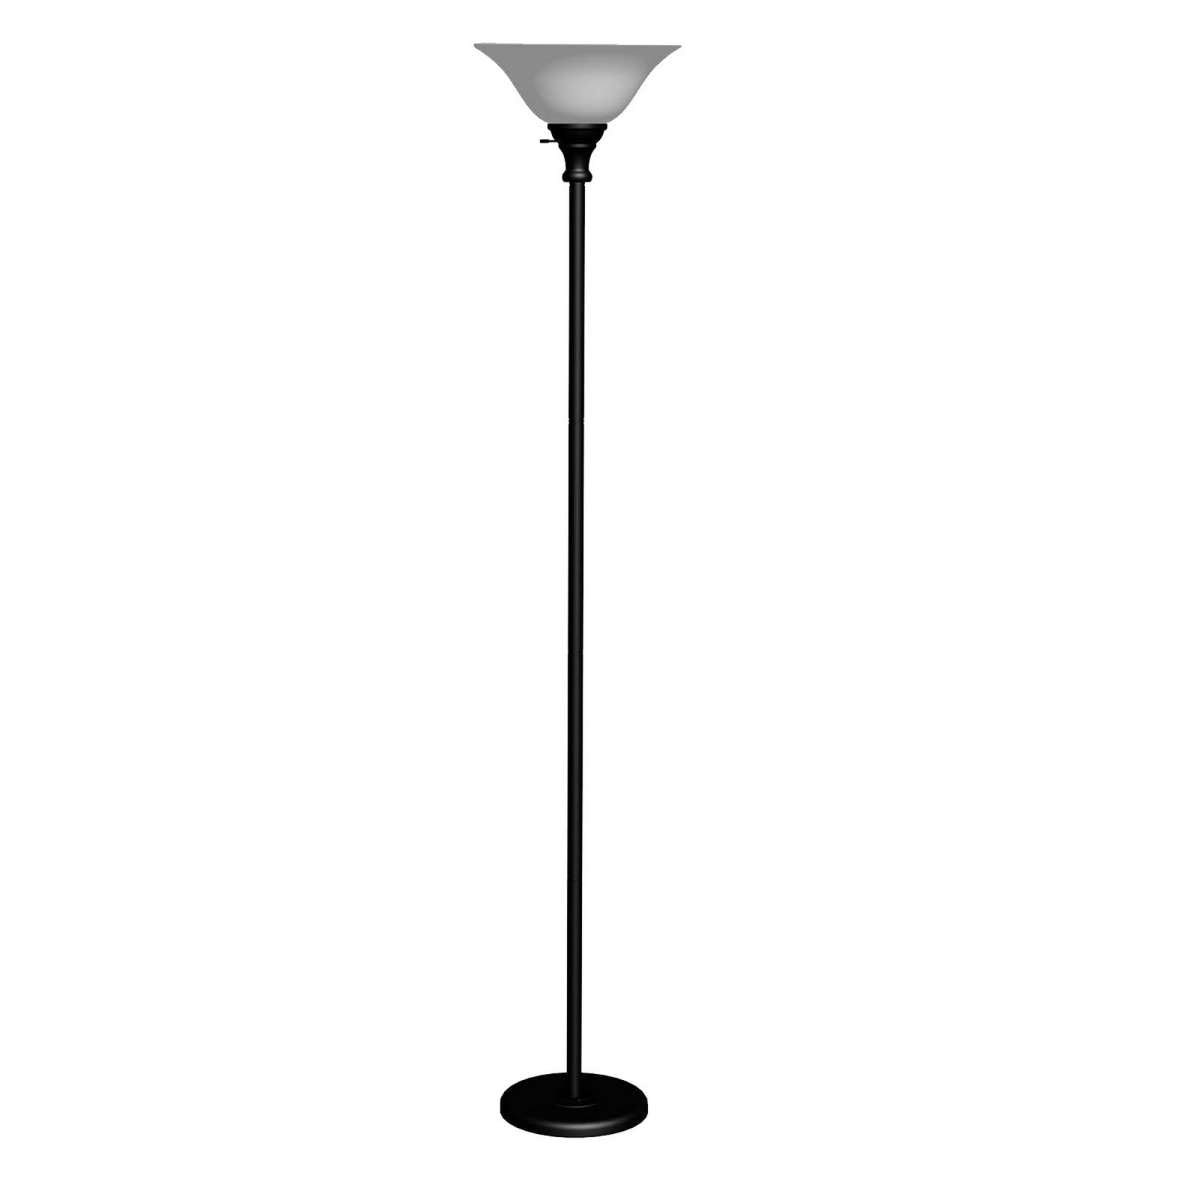 Metal Round 3 Way Torchiere Lamp With Frosted Glass Shade, Black And White By Benzara